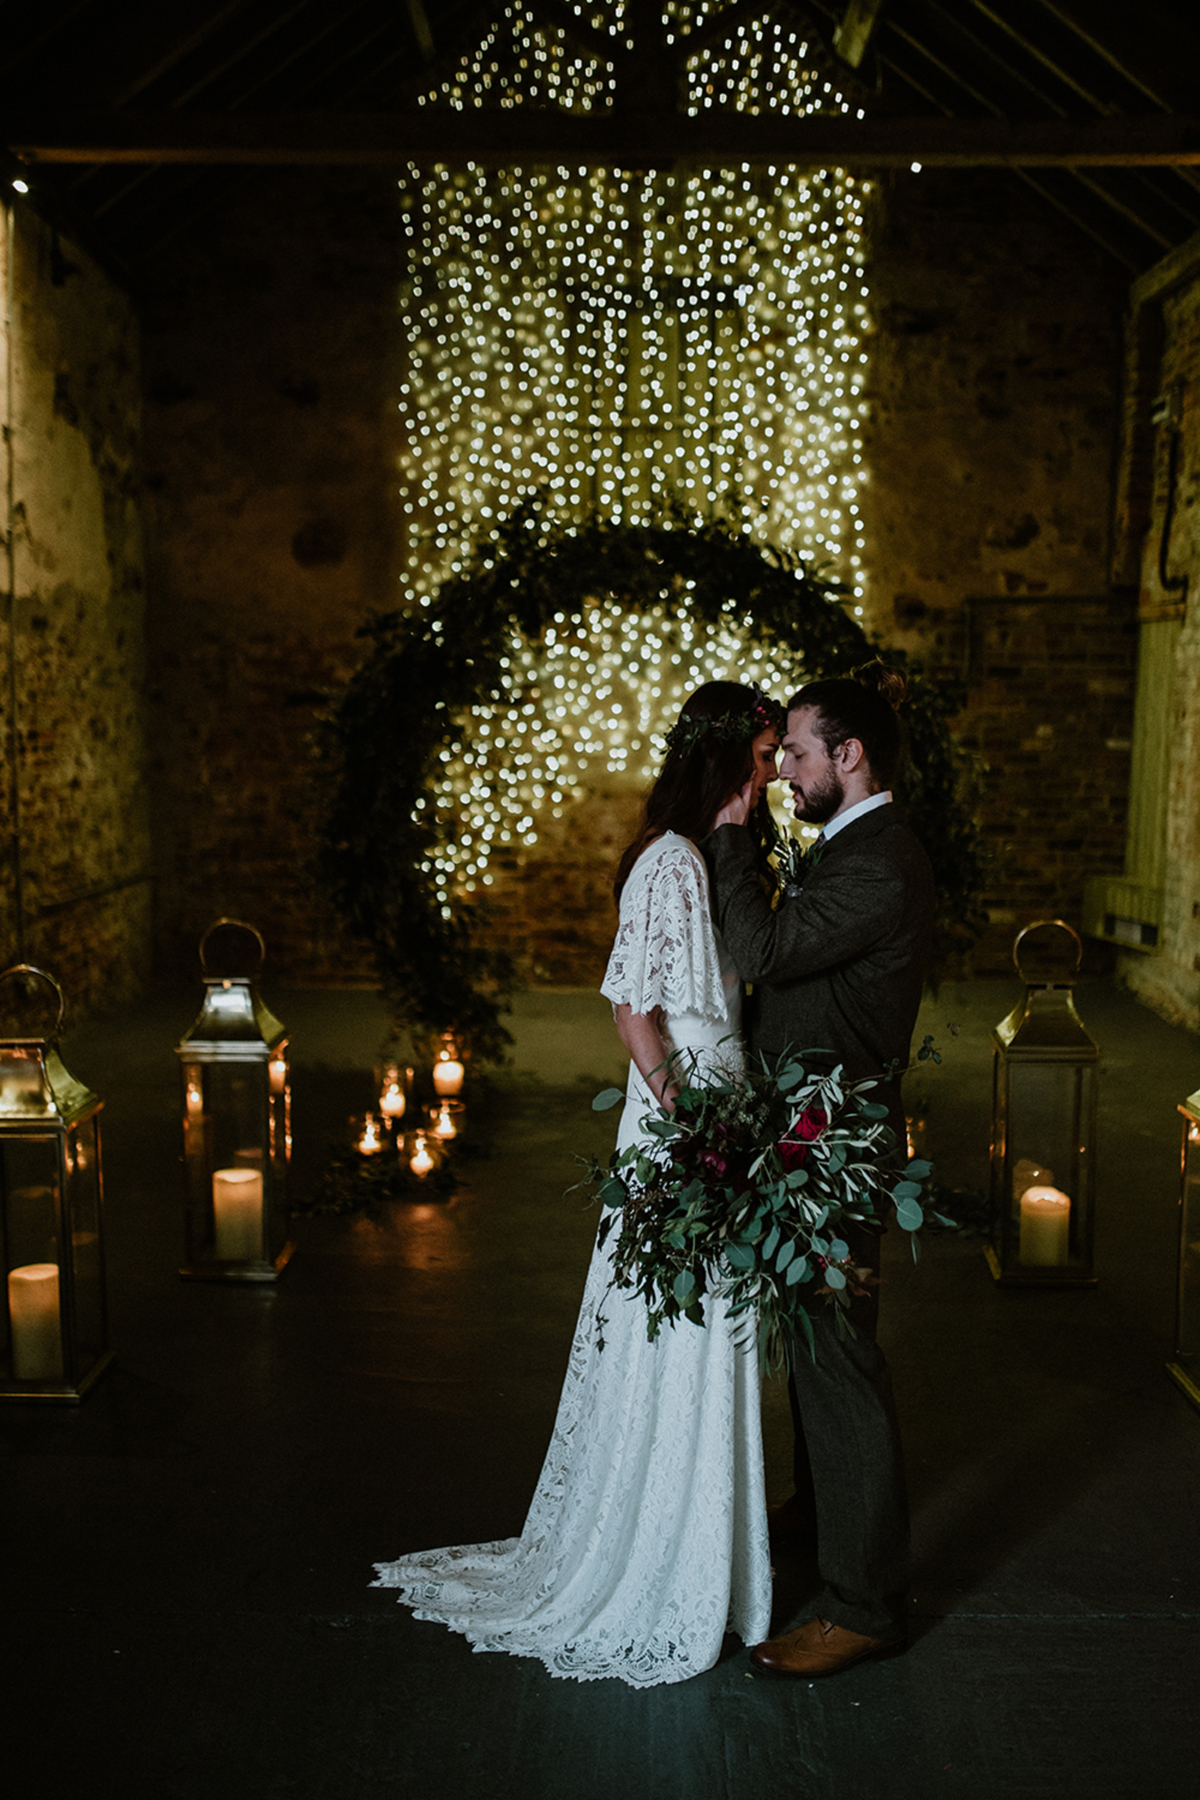 24 A Dark Romance an editorial shoot featuring Marylise gowns at The Normans wedding venue in York